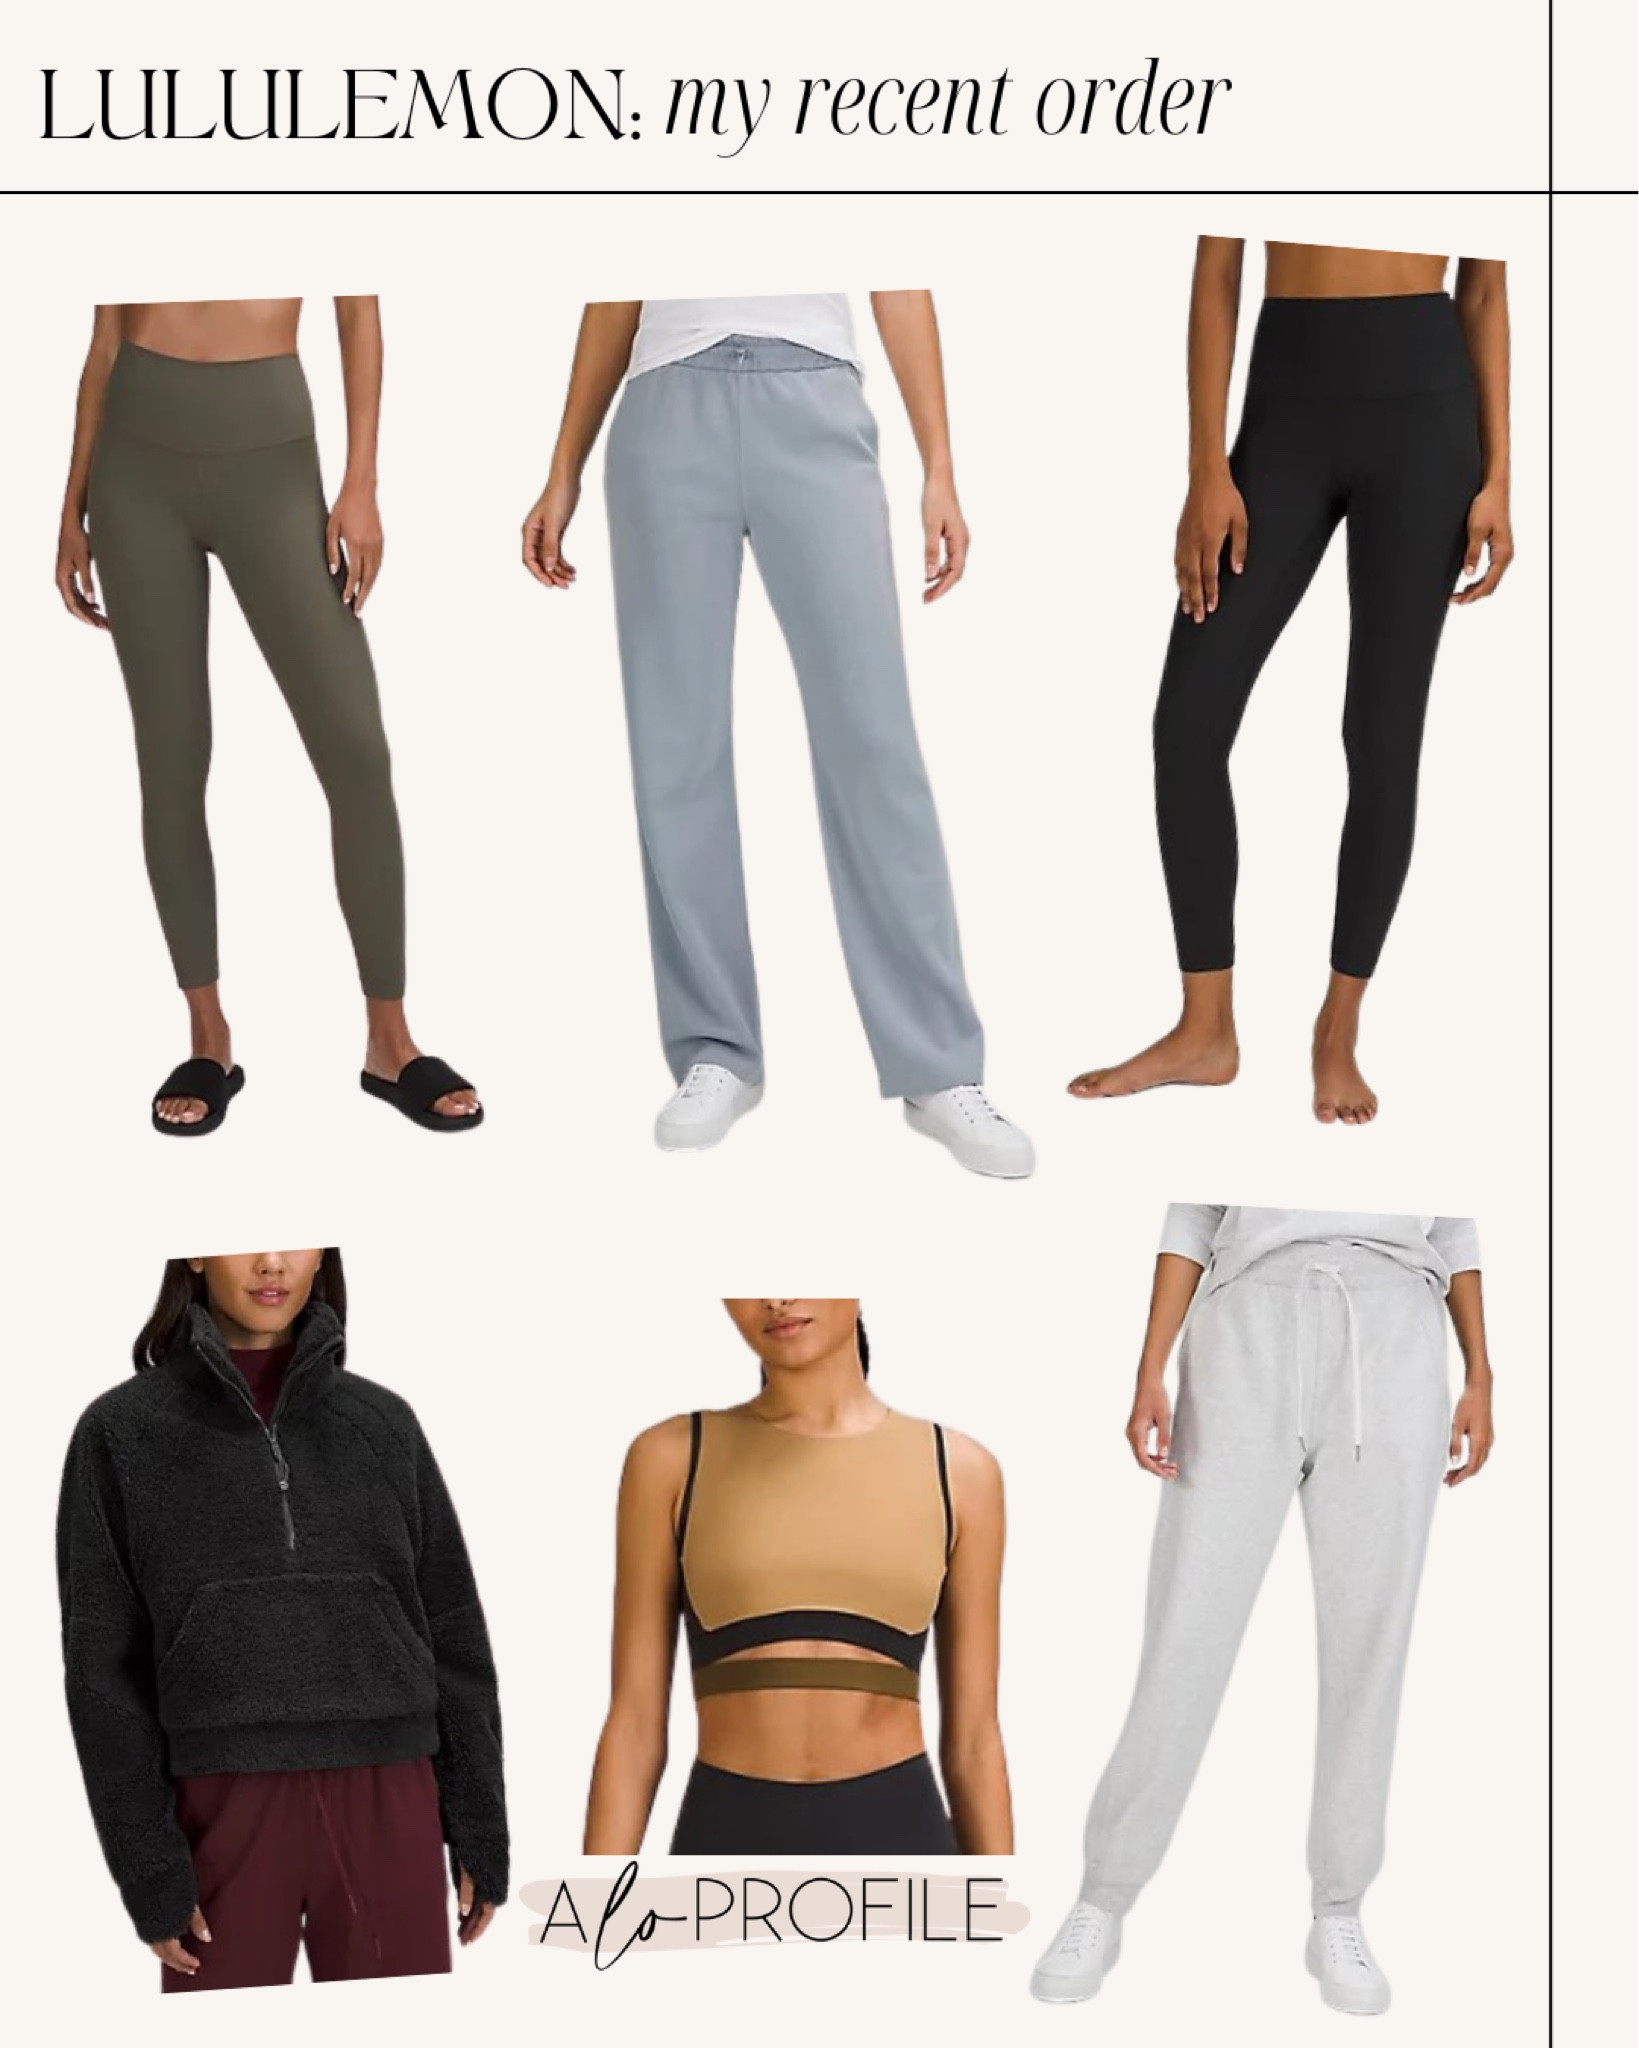 Softstreme High-Rise Pant Online … curated on LTK